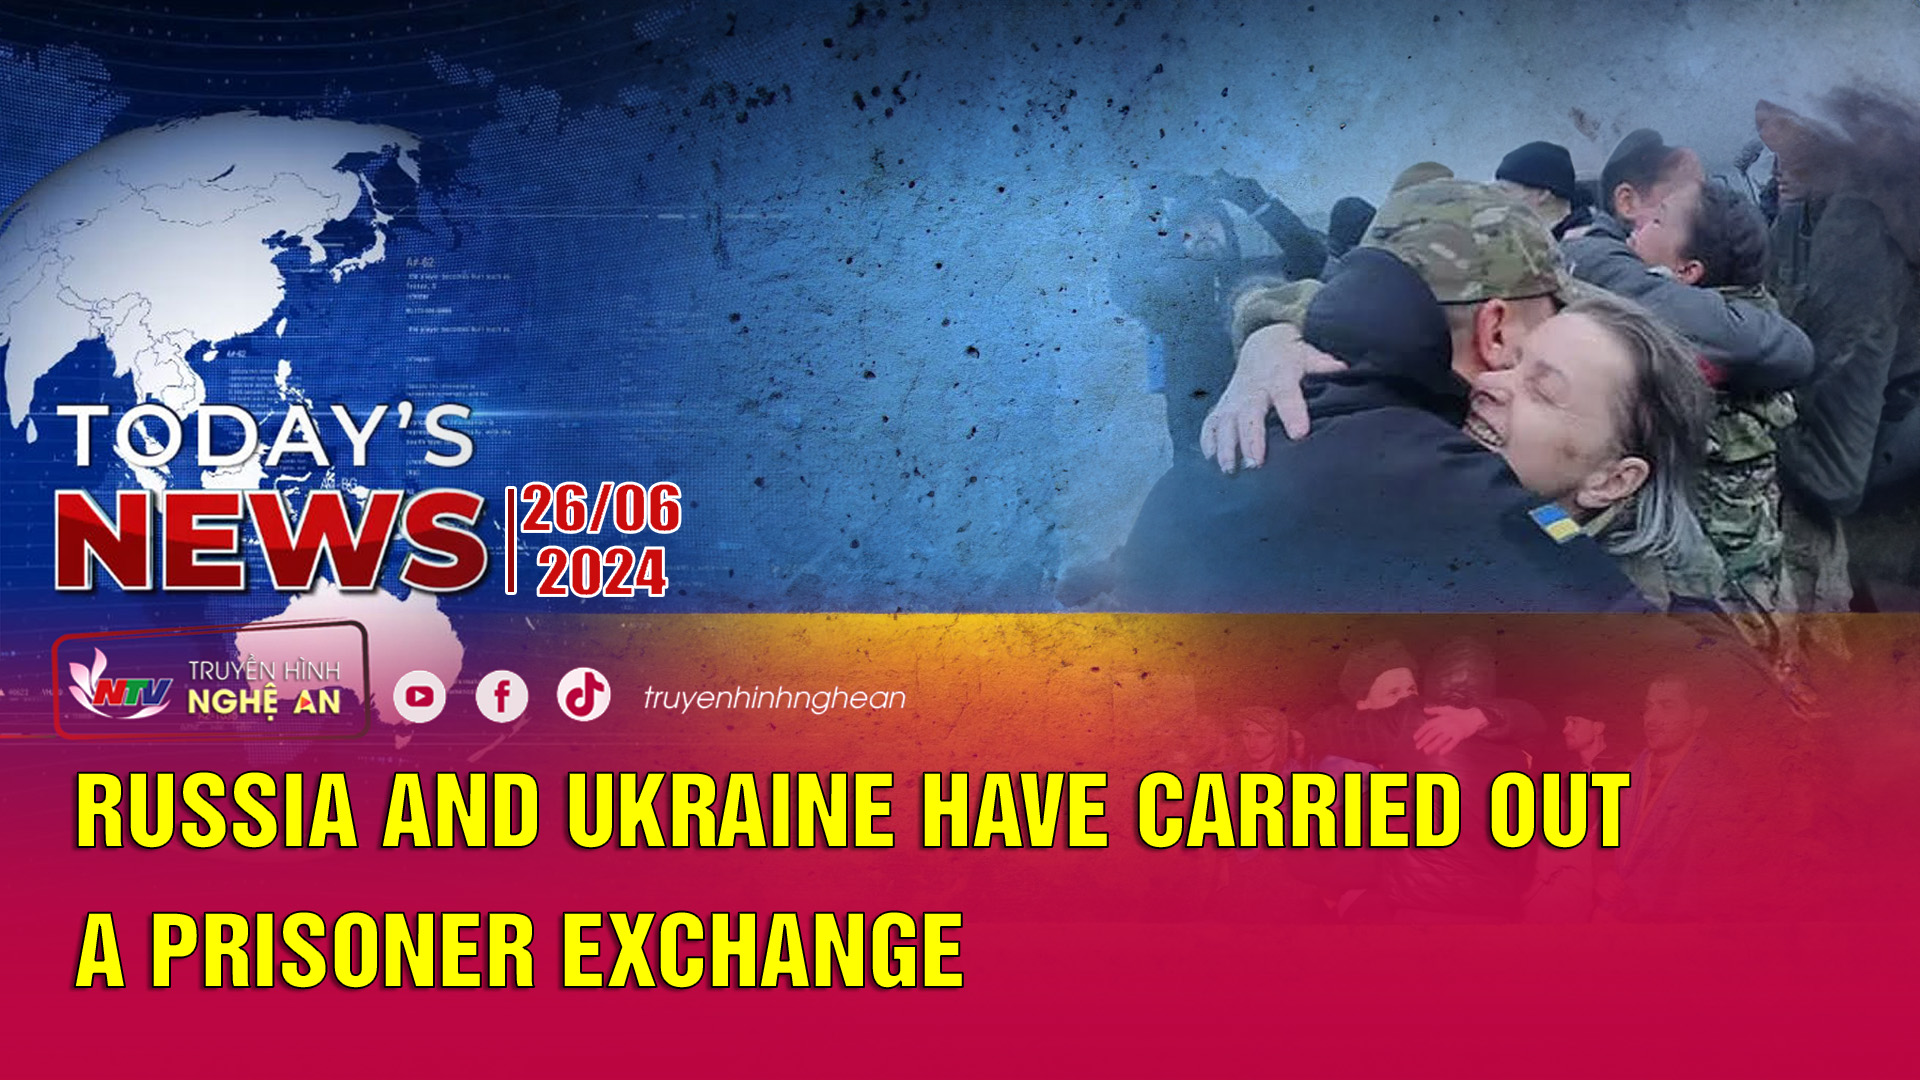 Today's News 26/06/2024: Russia and Ukraine have carried out a prisoner exchange